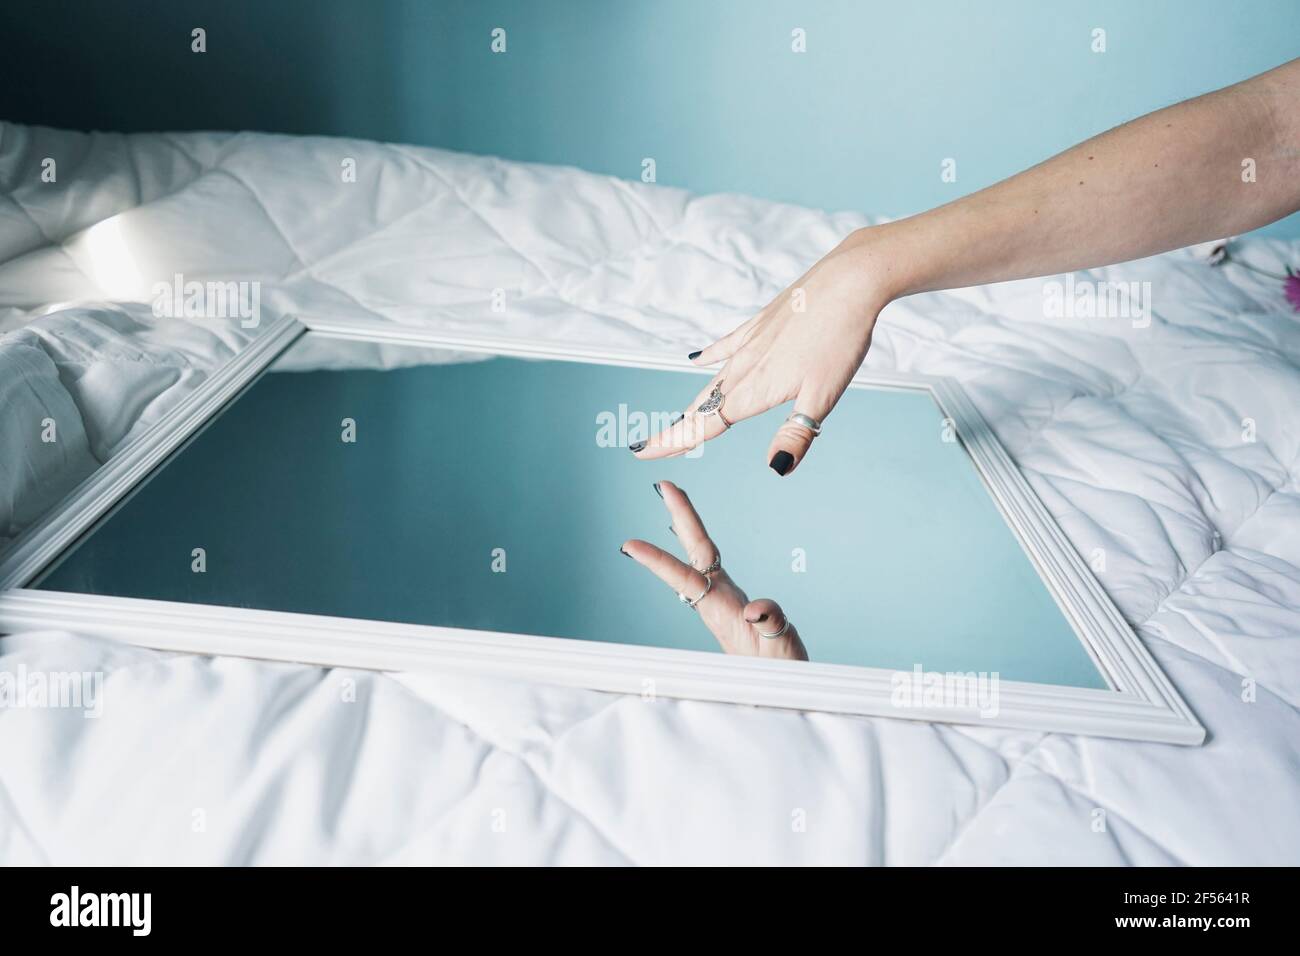 Hand of young woman ltouching mirror lying on white duvet Stock Photo